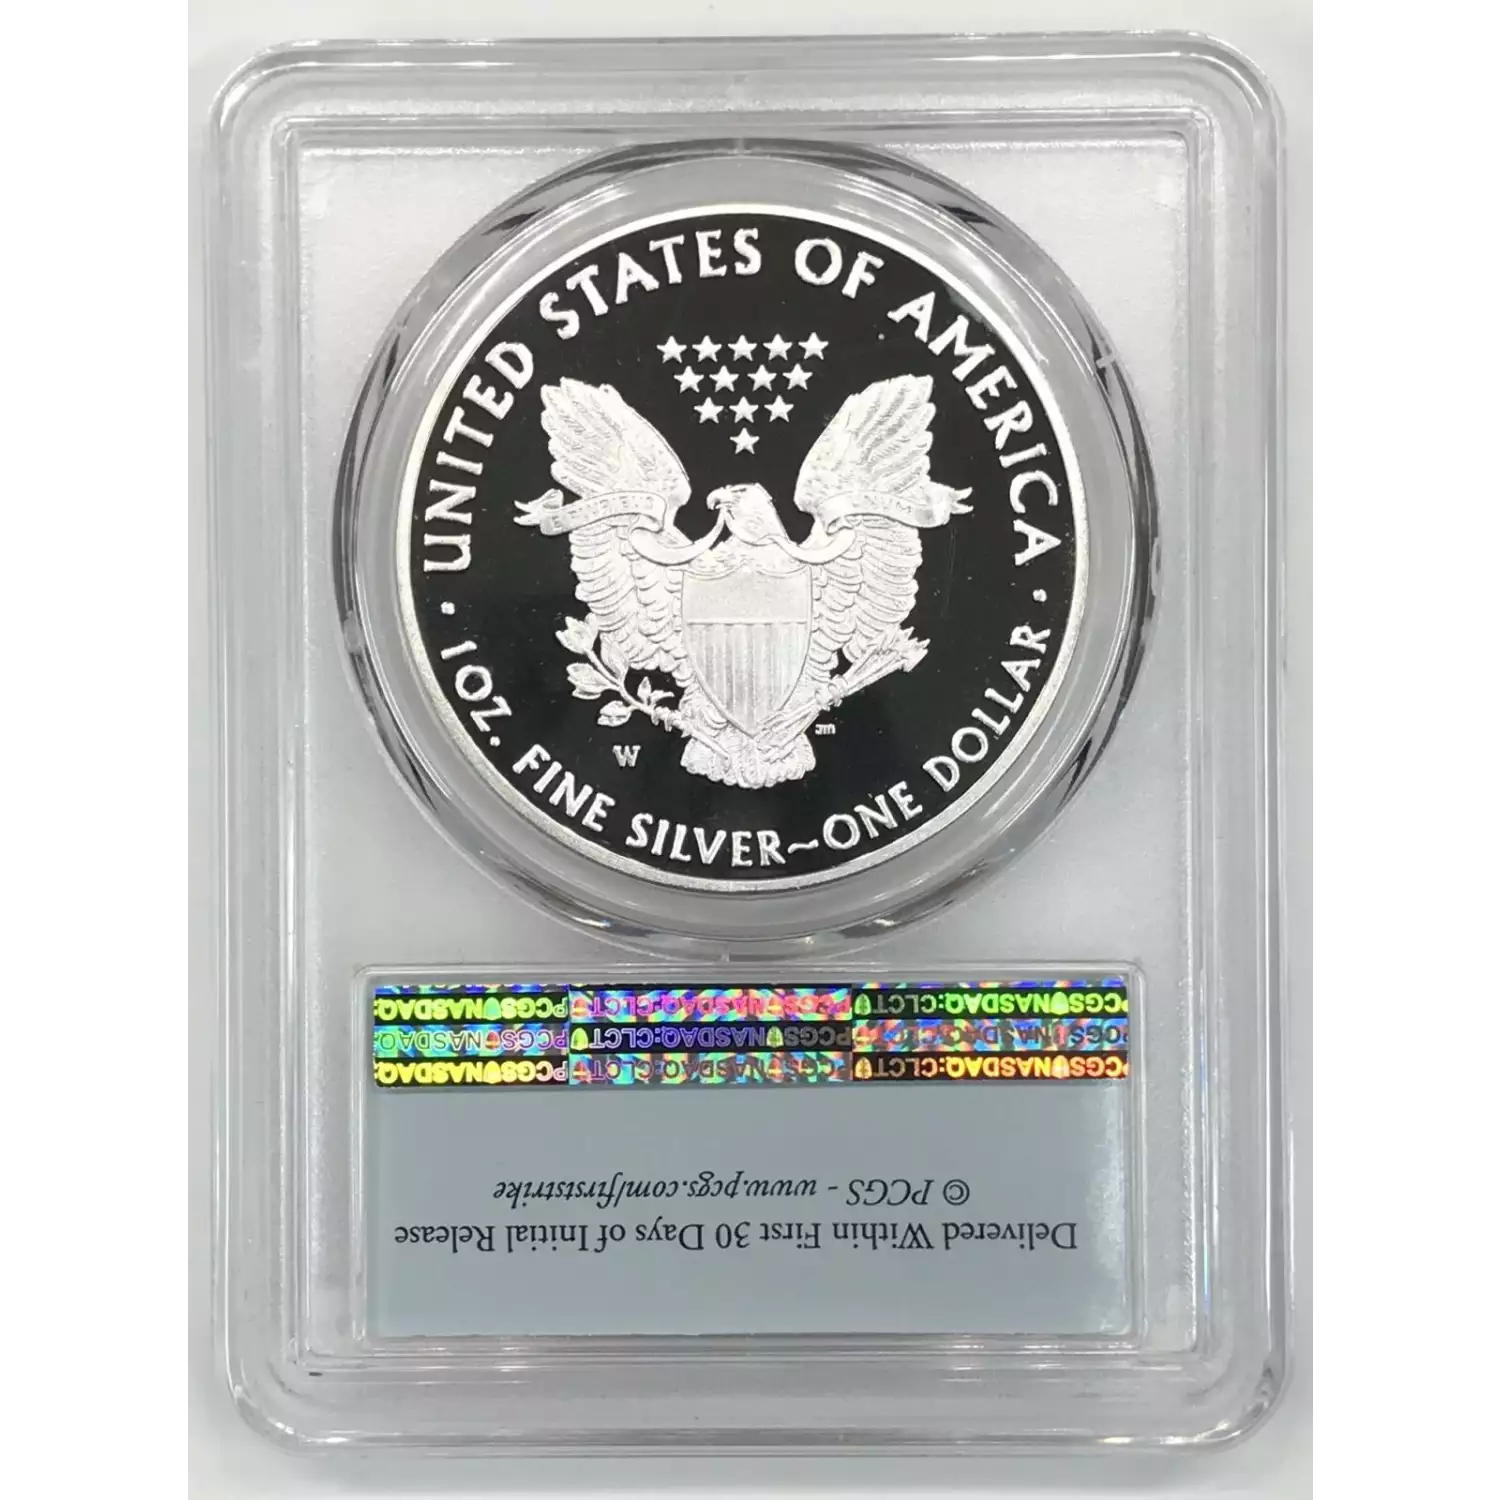 2016-W $1 Silver Eagle 30th Anniversary - Lettered Edge FSSEChronicle Set First Strike, DCAM (2)